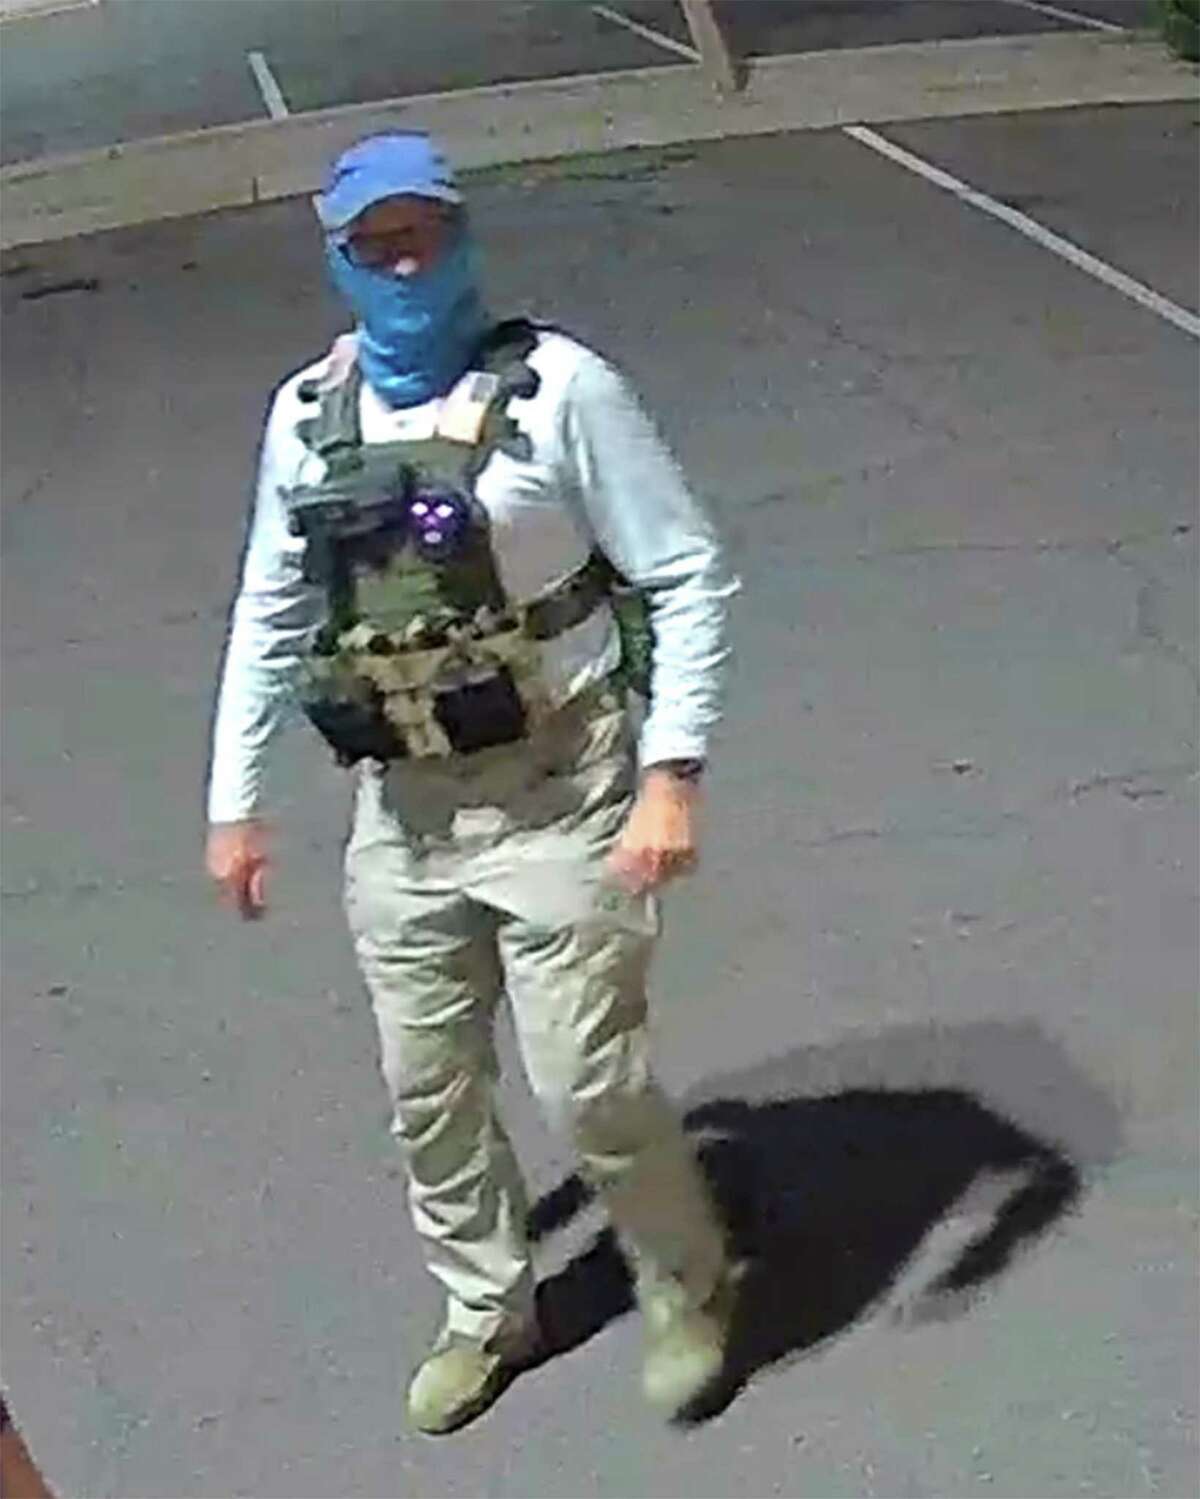 An armed individual dressed in tactical gear at a ballot drop box in Mesa, Arizona, on Oct. 21, 2022.